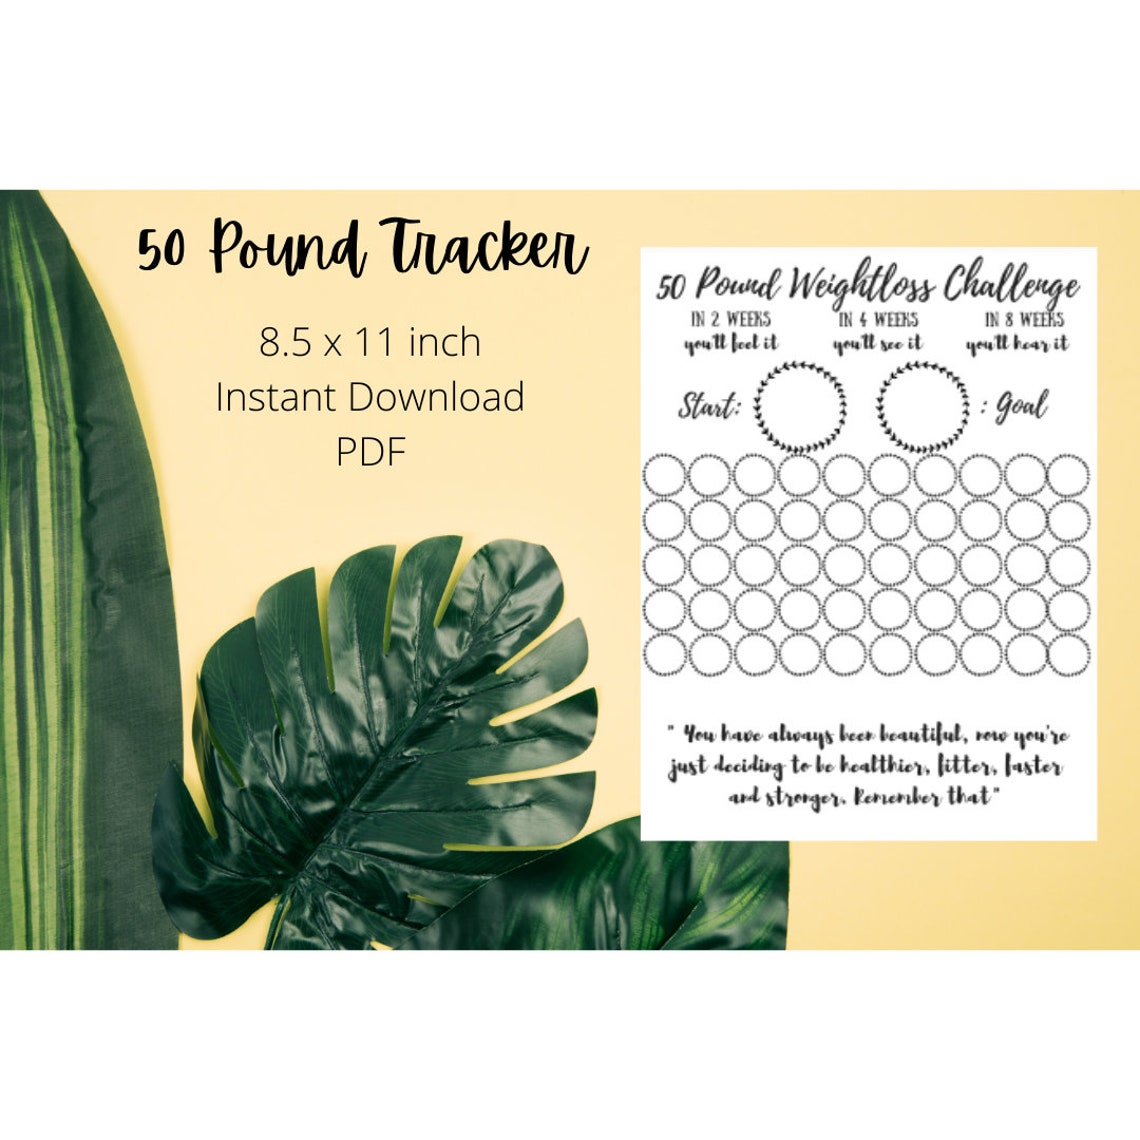 50-pound-weight-loss-tracker-instant-download-printable-etsy